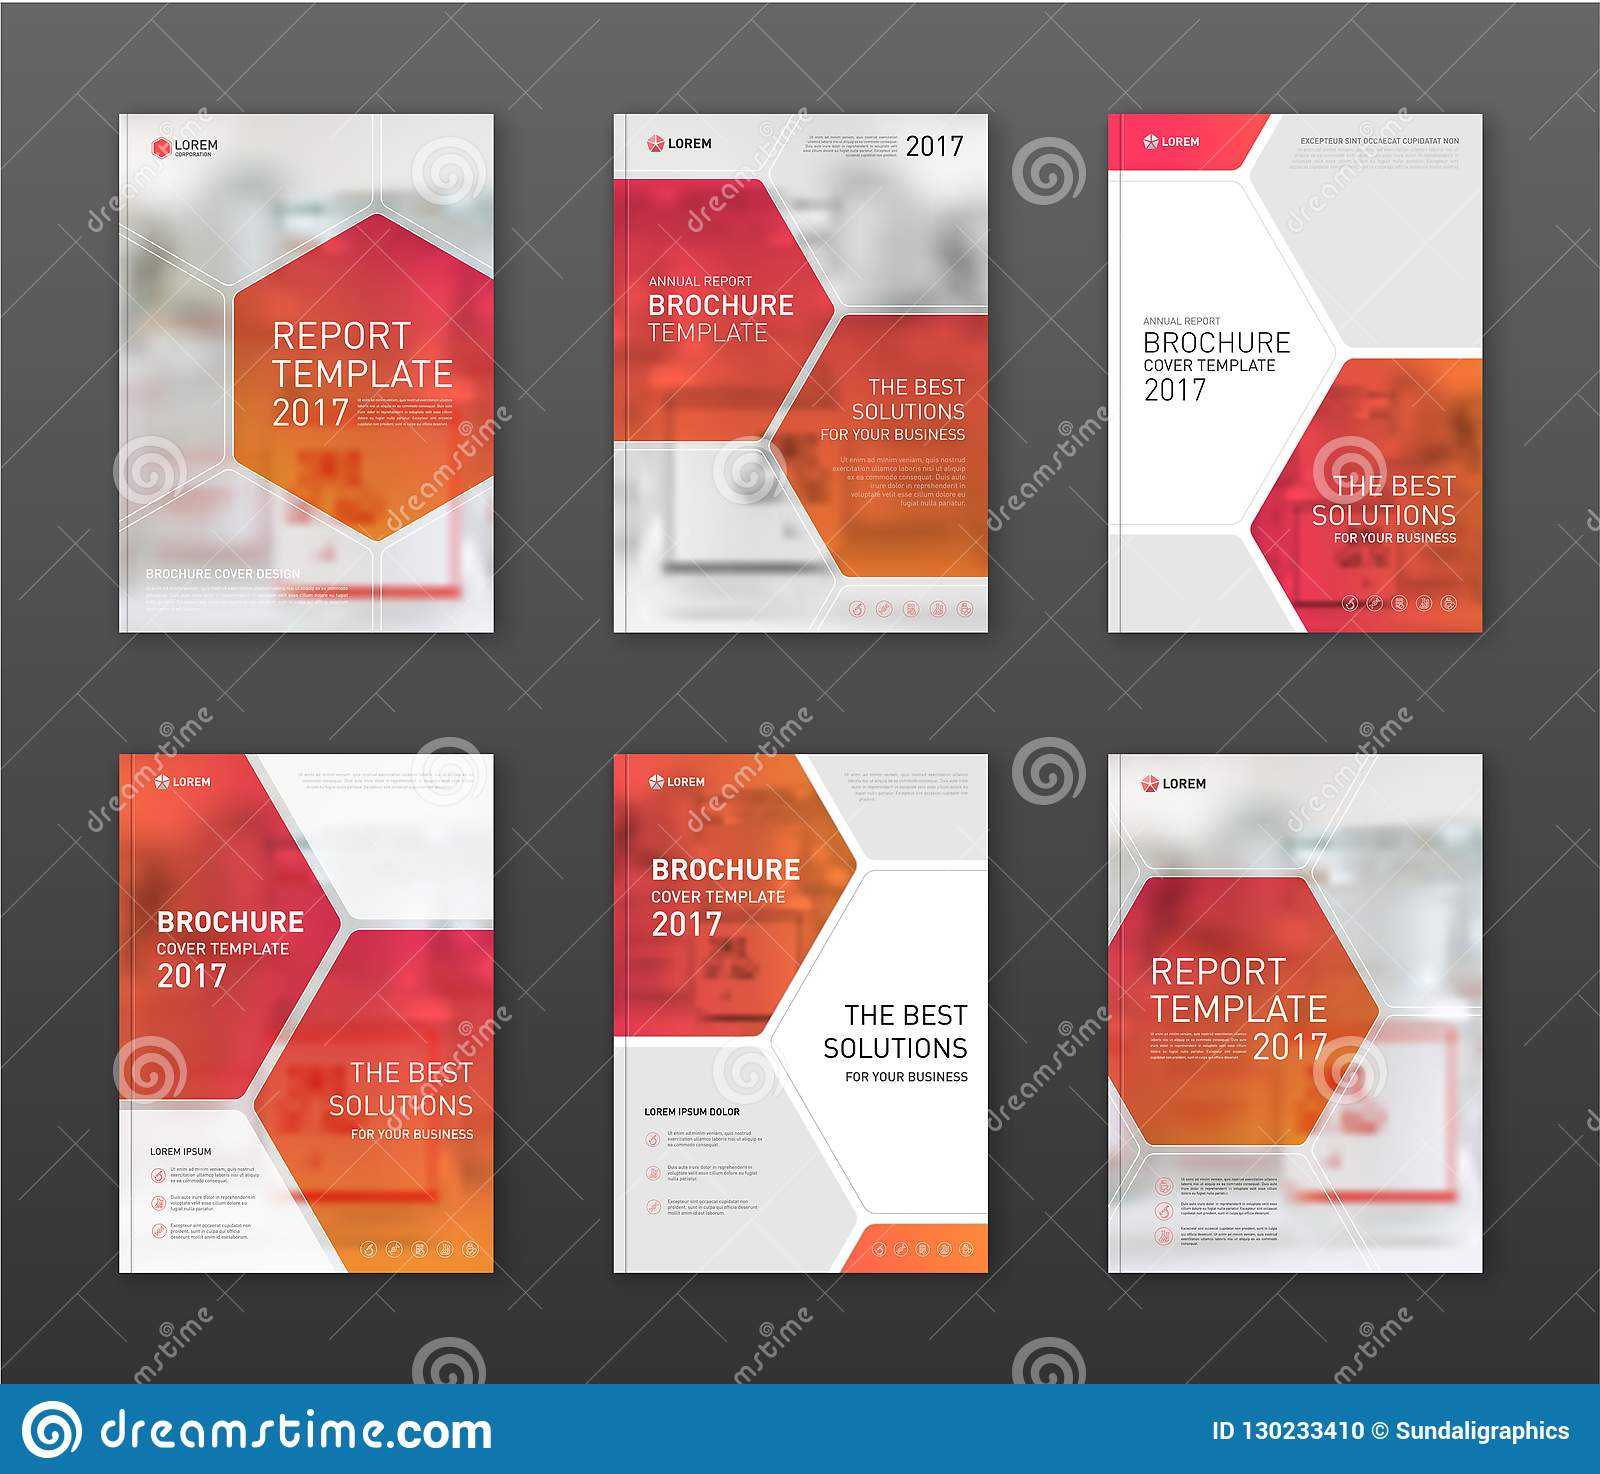 Pharmaceutical Brochure Cover Templates Set. Stock Vector Within Pharmacy Brochure Template Free